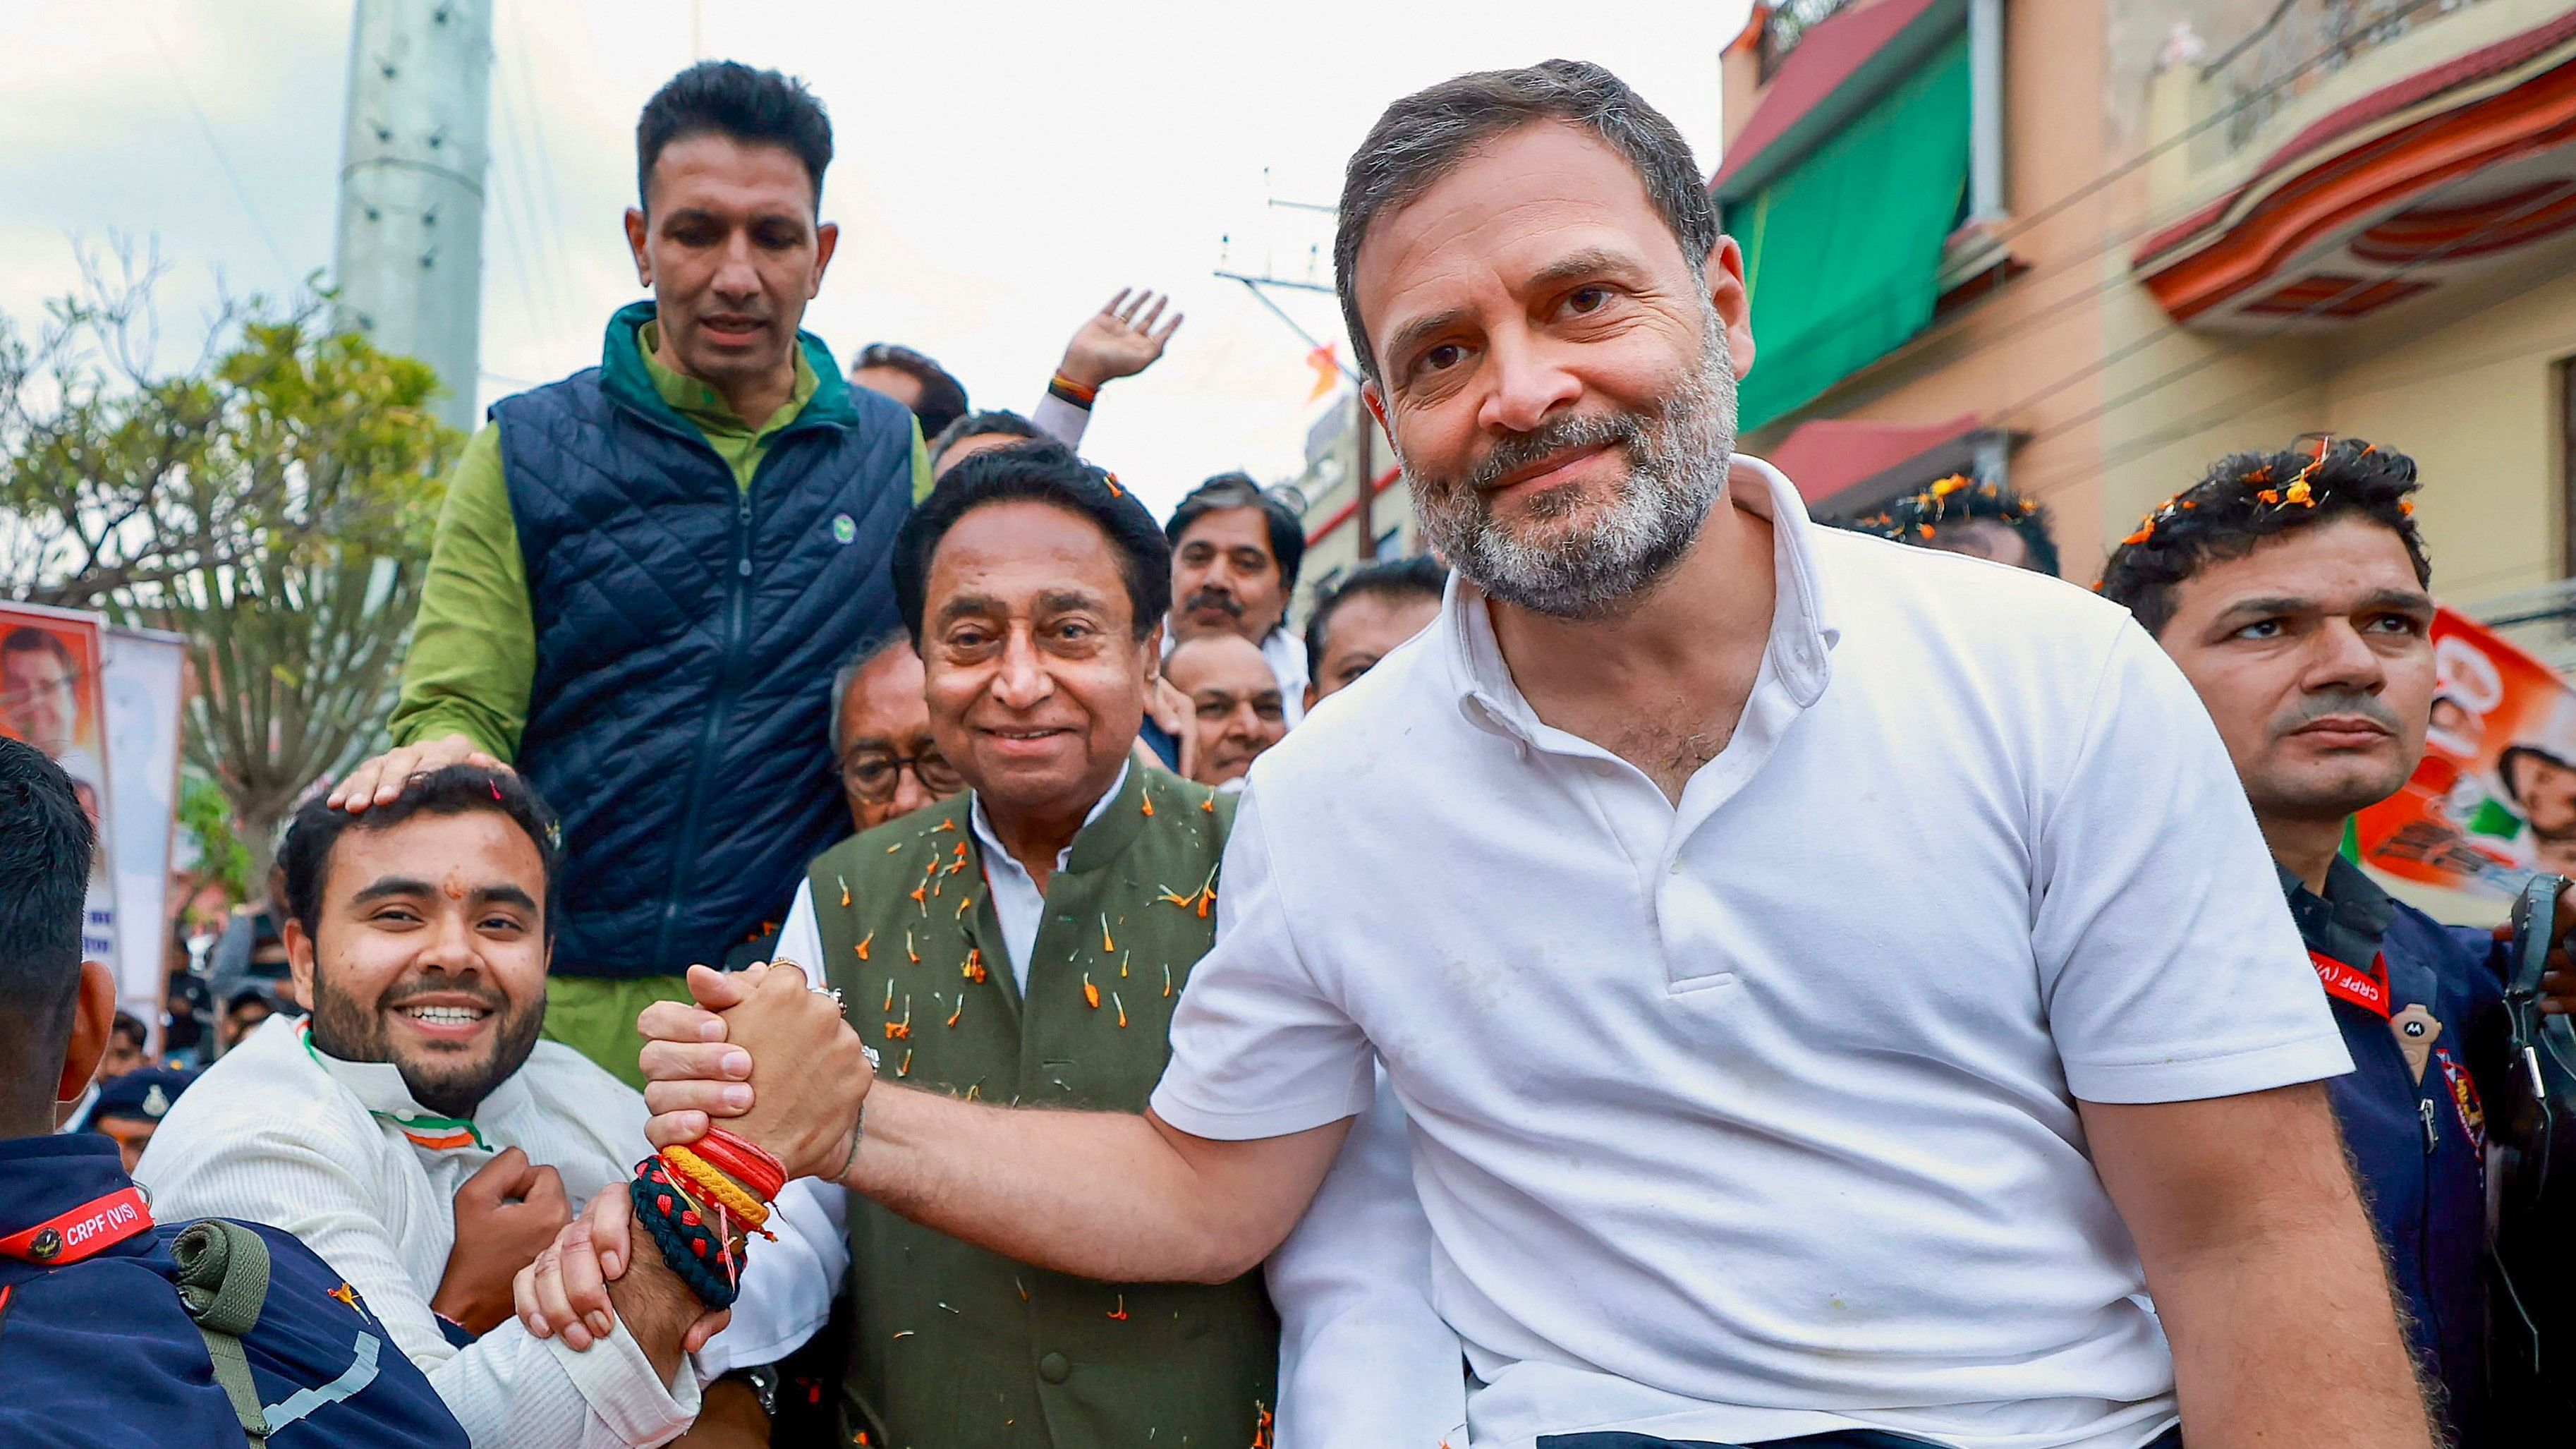 <div class="paragraphs"><p>Congress leader Rahul Gandhi with Madhya Pradesh state party President Jitendra Patwari, party leader Kamal Nath and others greets a supporter at a roadshow during the Bharat Jodo Nyay Yatra in Madhya Pradesh.</p></div>